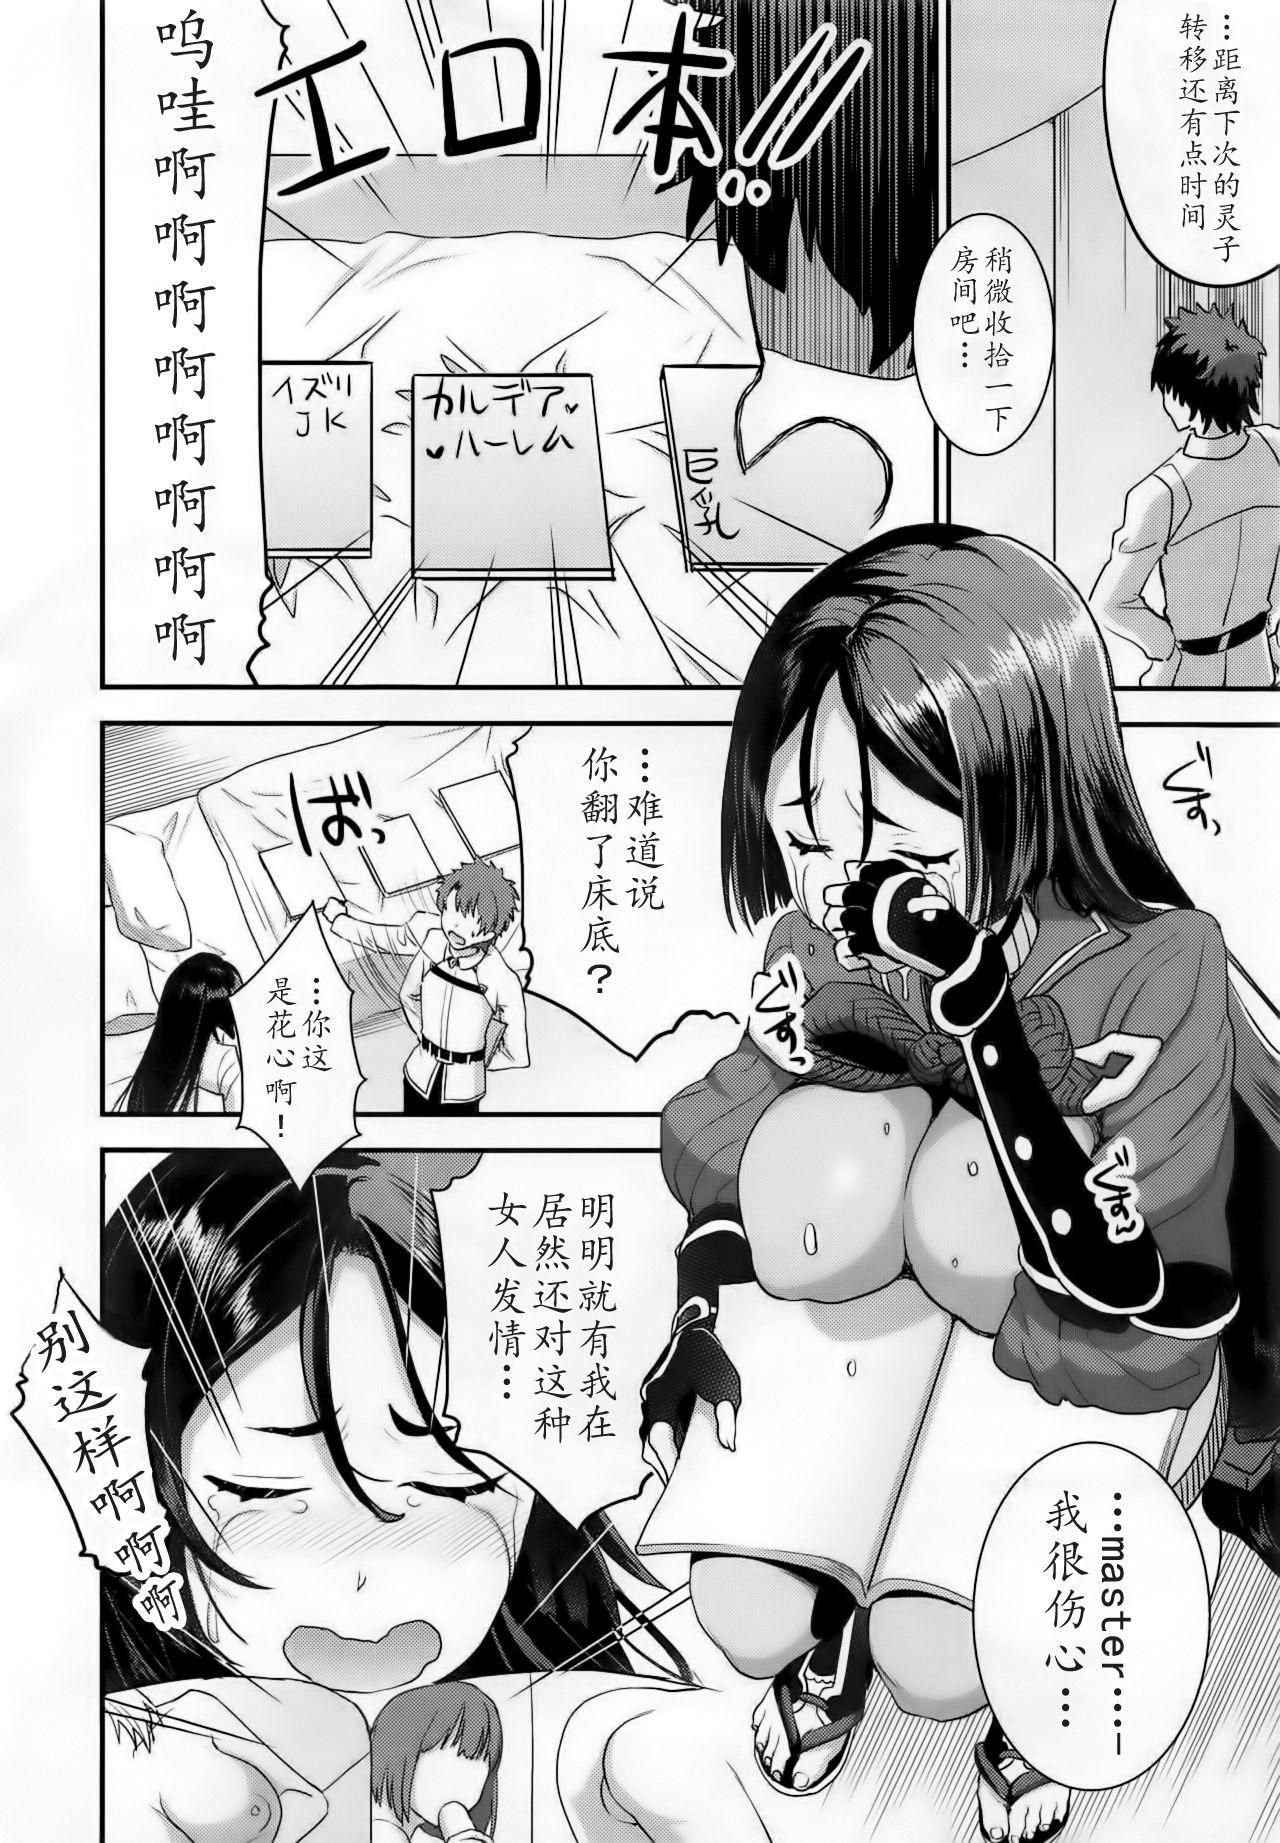 Pierced Haha dake o Miteite - Fate grand order Old Vs Young - Page 5